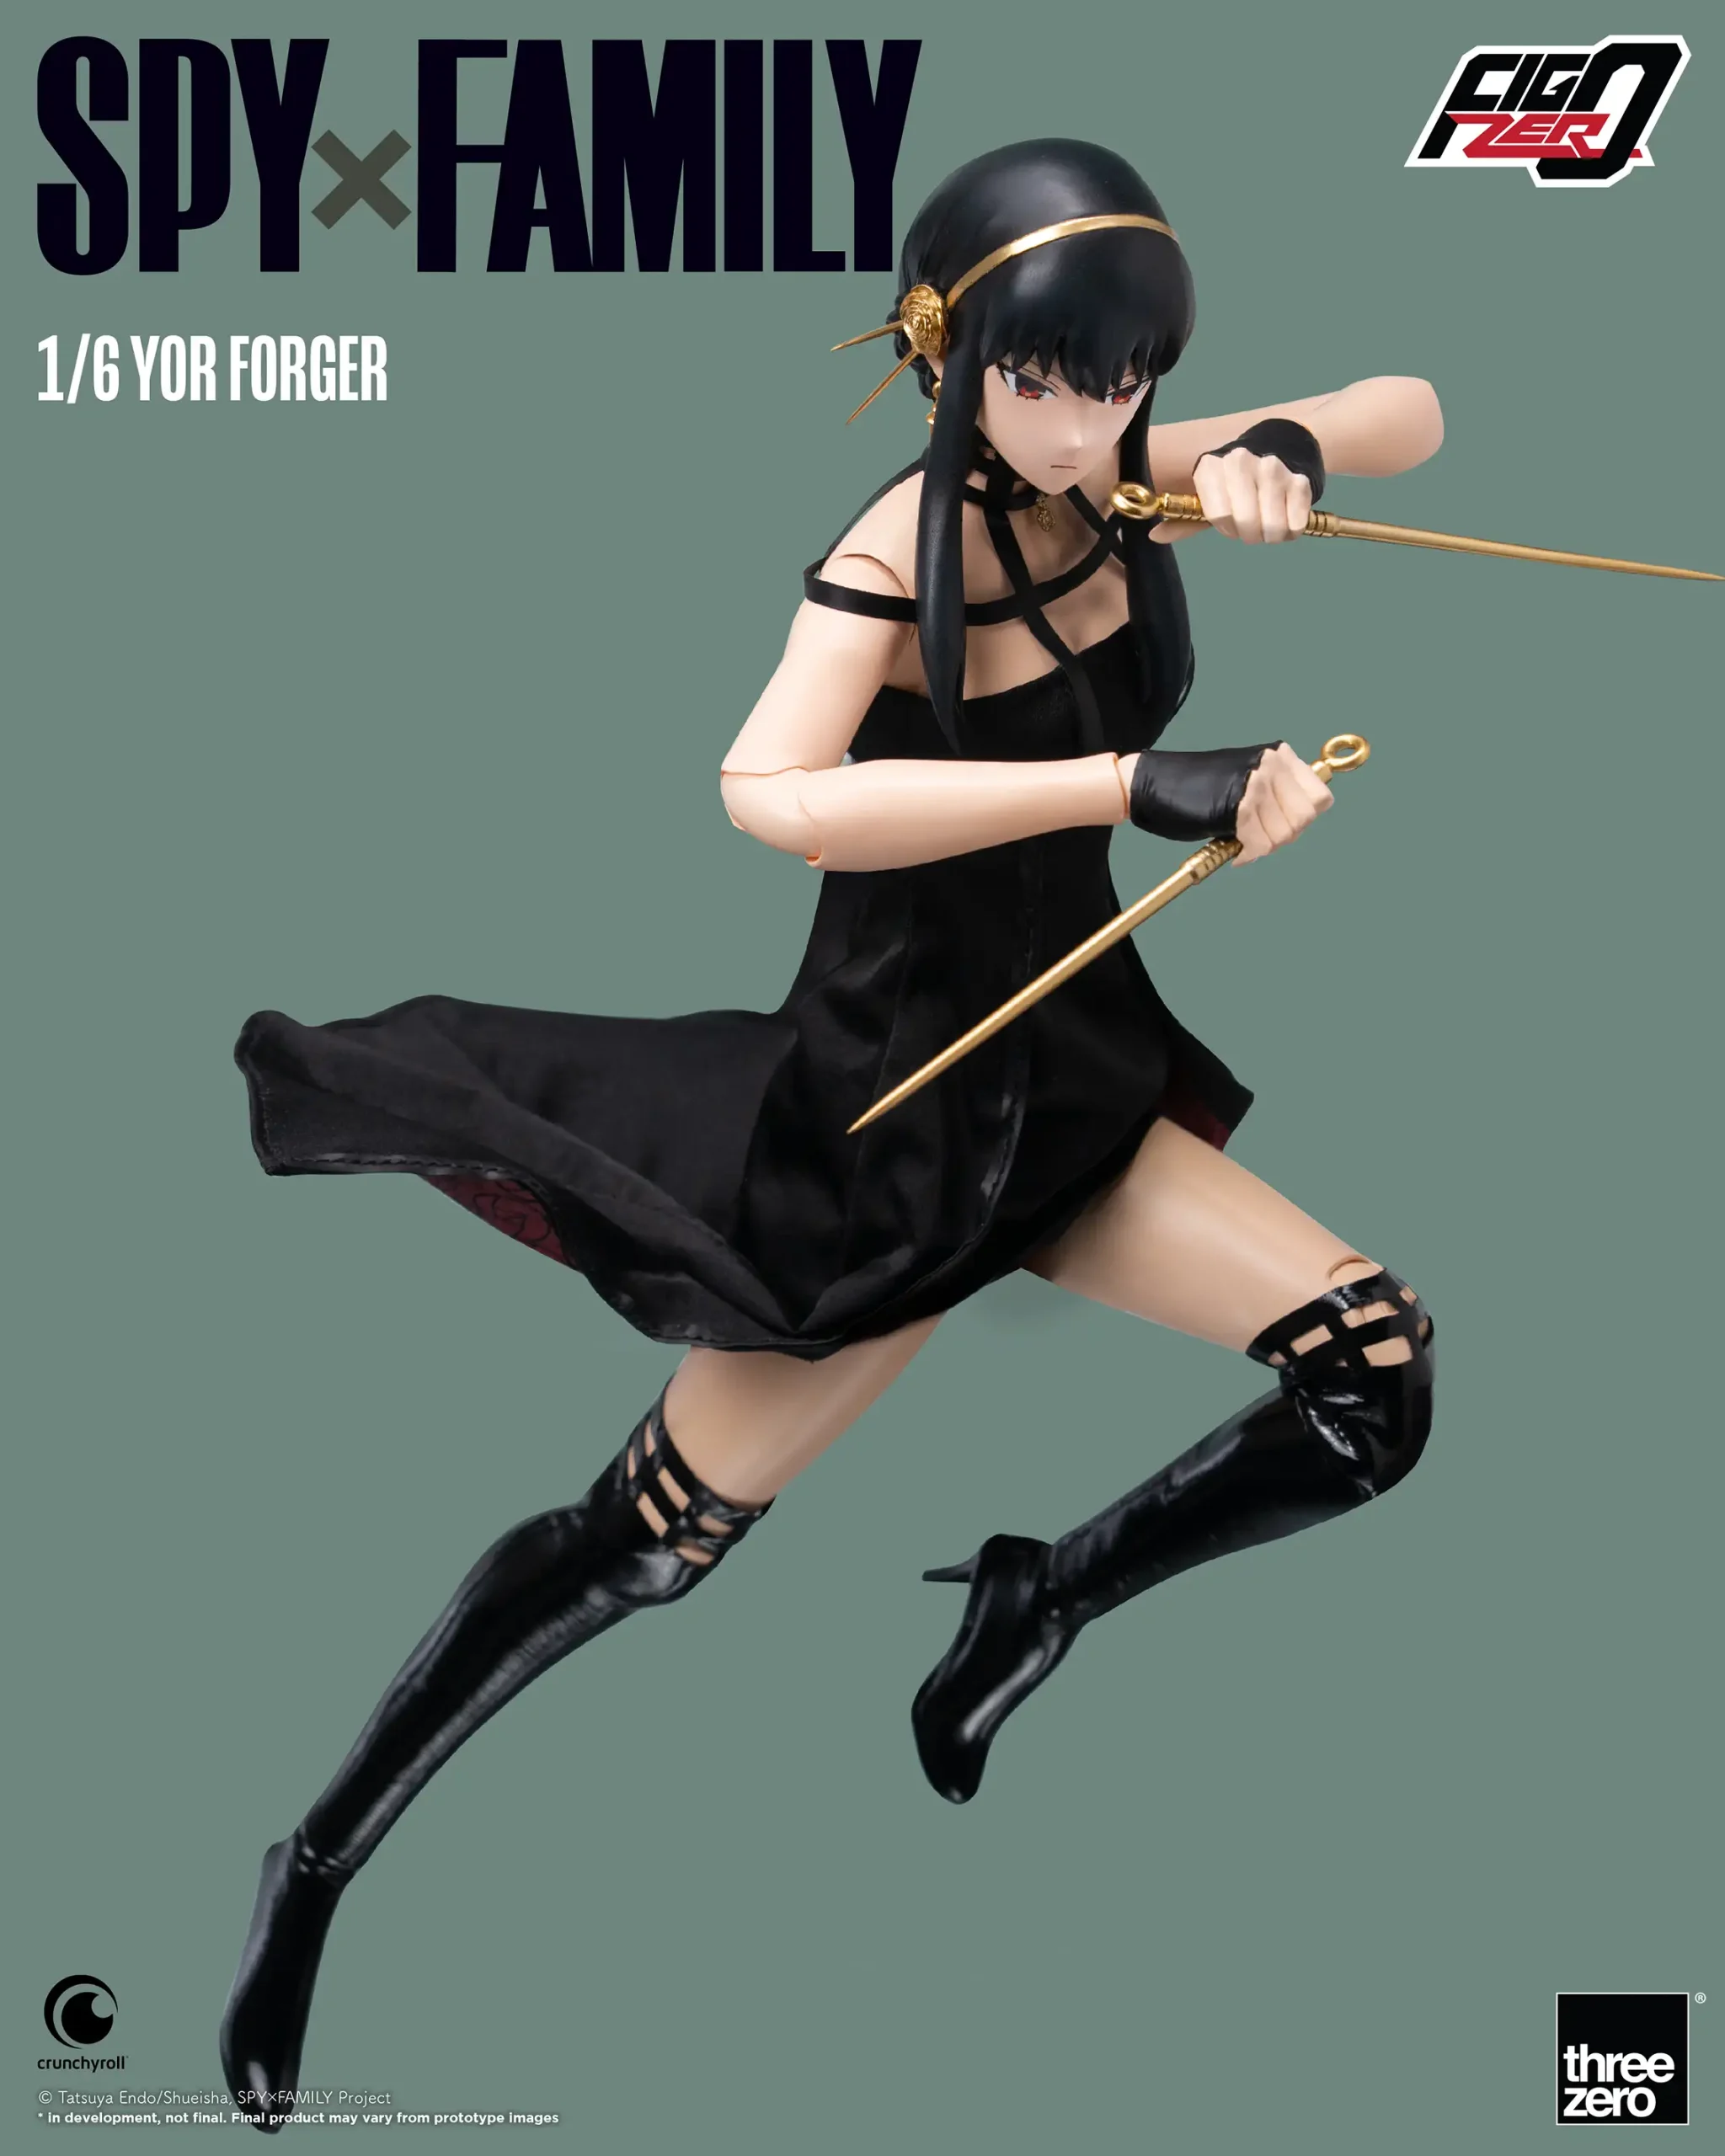 Spy x Family Yor Forger 1/6 Scale Figure